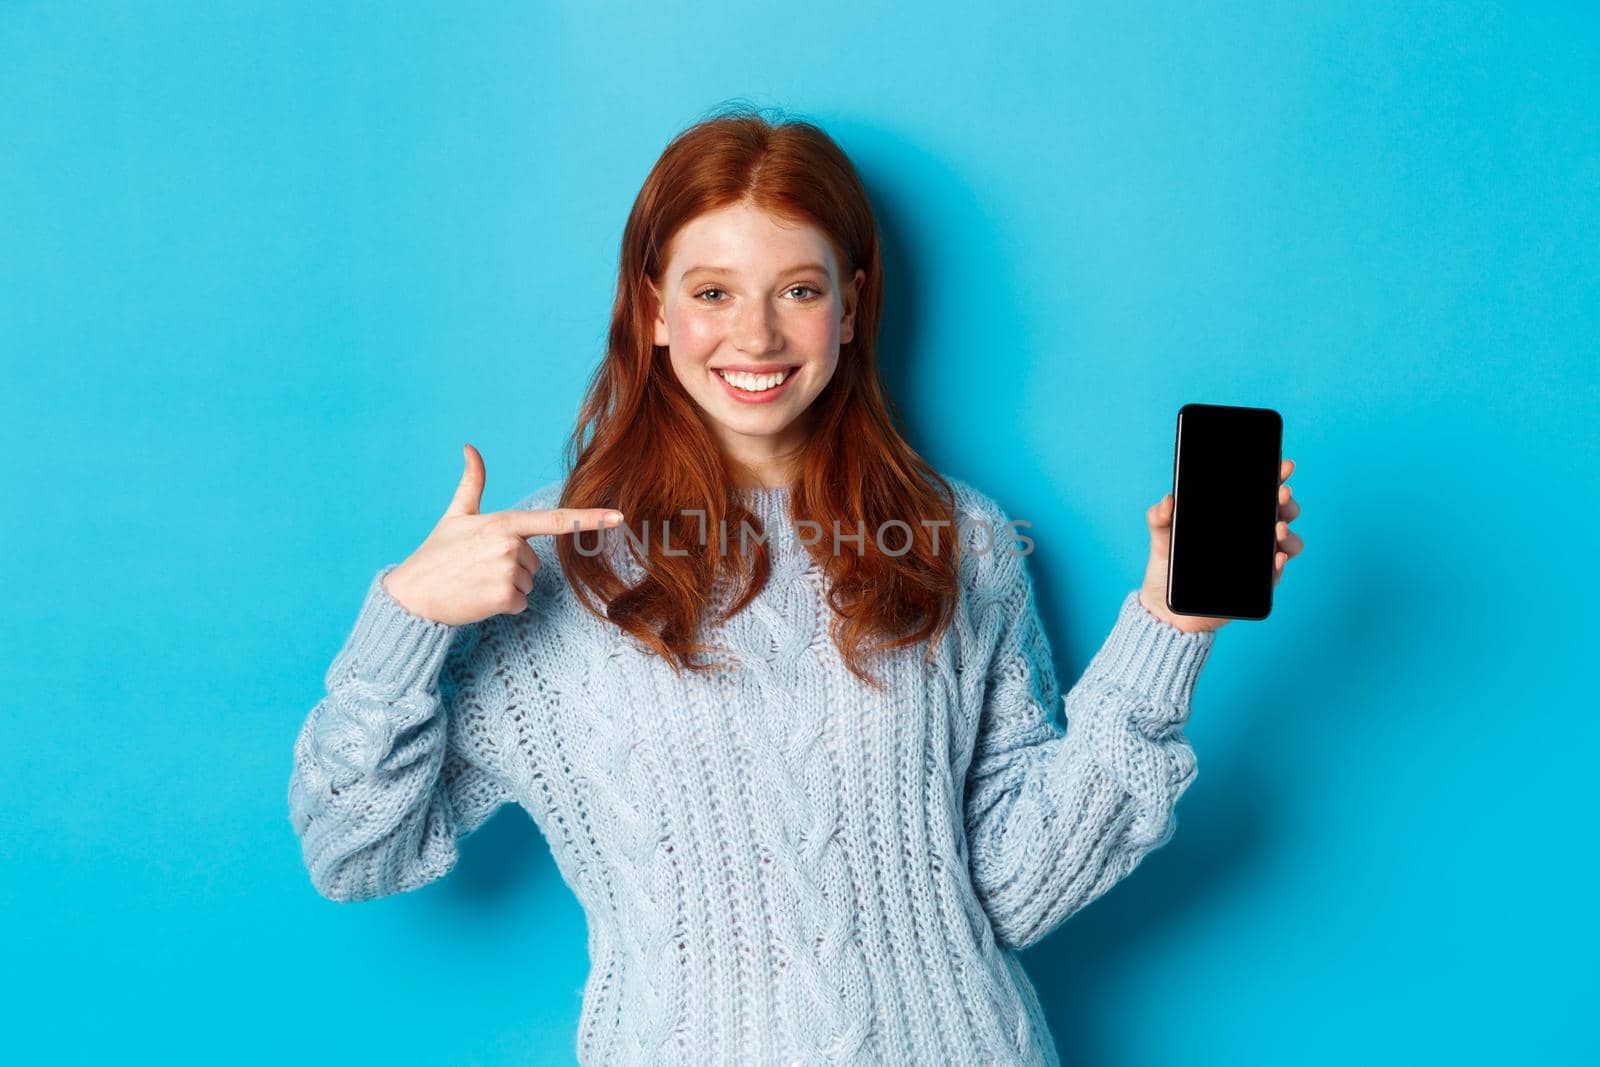 Satisfied redhead girl pointing at phone screen, showing smartphone app or online promo and smiling, standing in sweater against blue background.